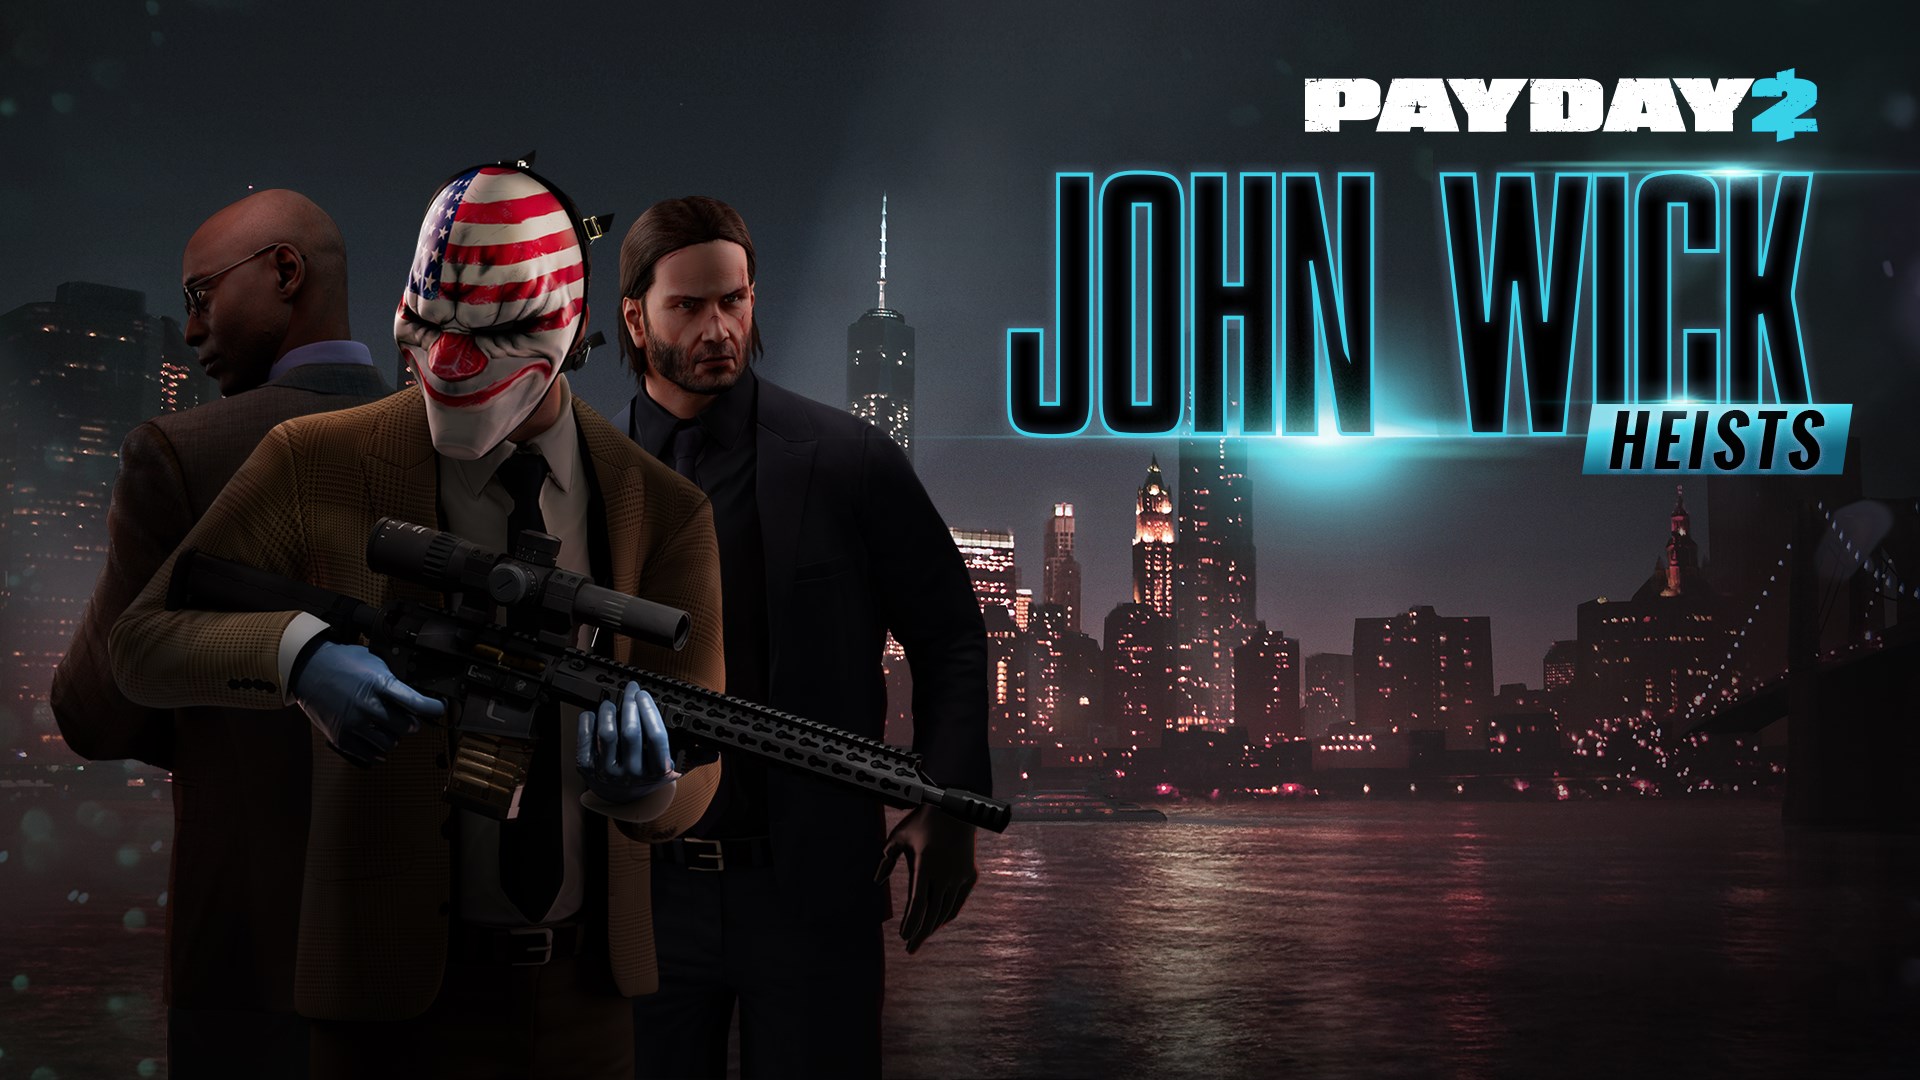 payday 2 music mods